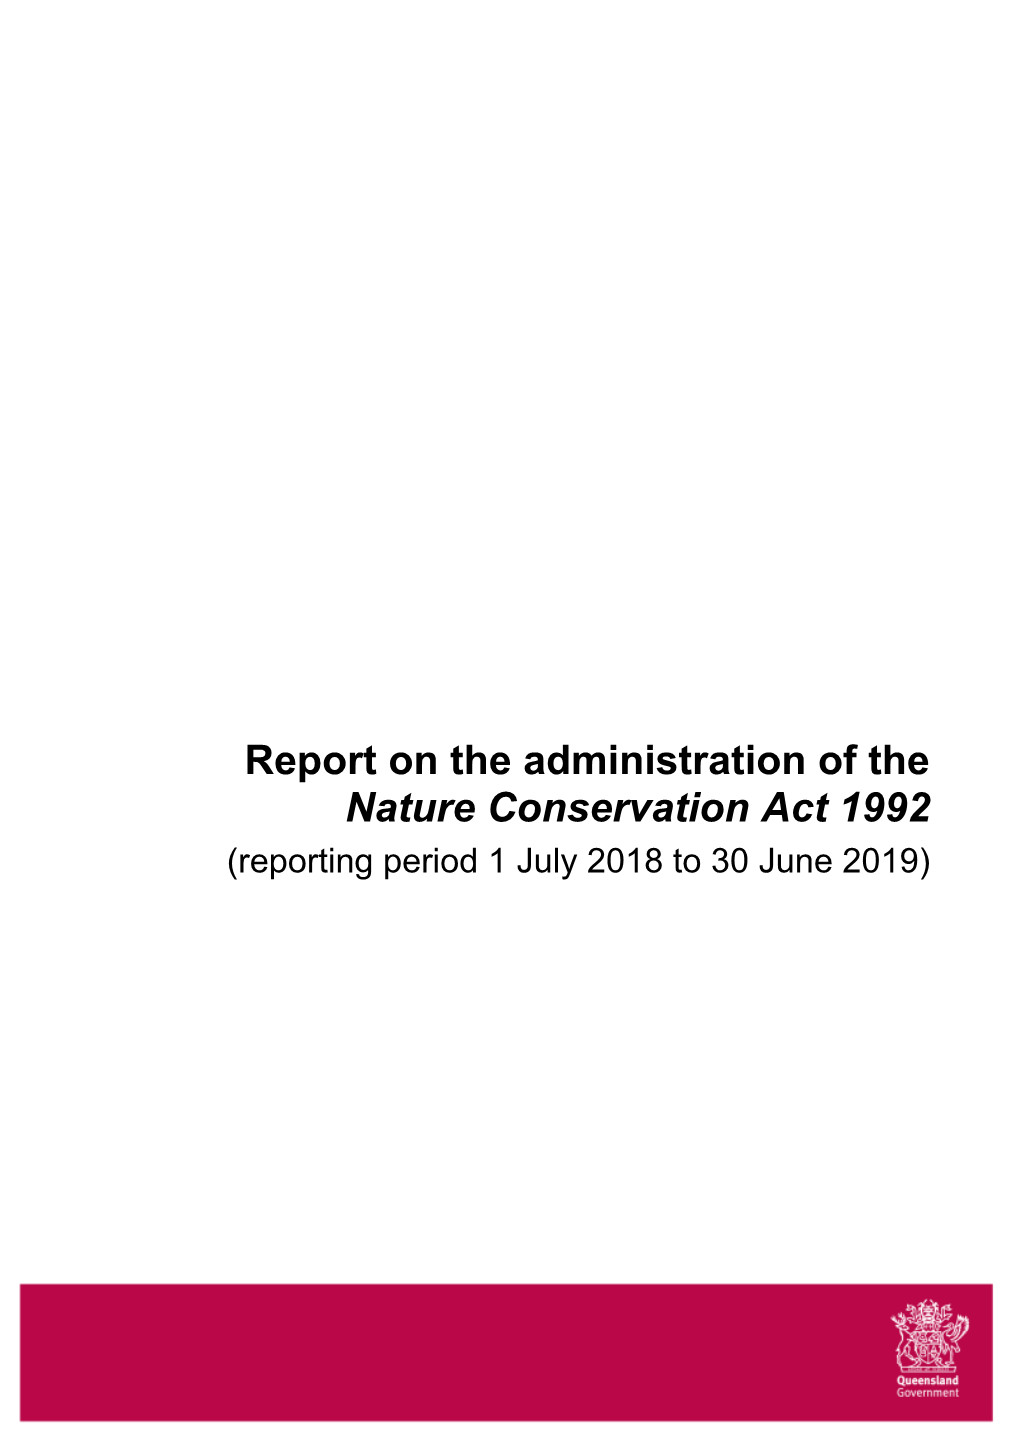 Report on the Administration of the Nature Conservation Act 1992 (Reporting Period 1 July 2018 to 30 June 2019)